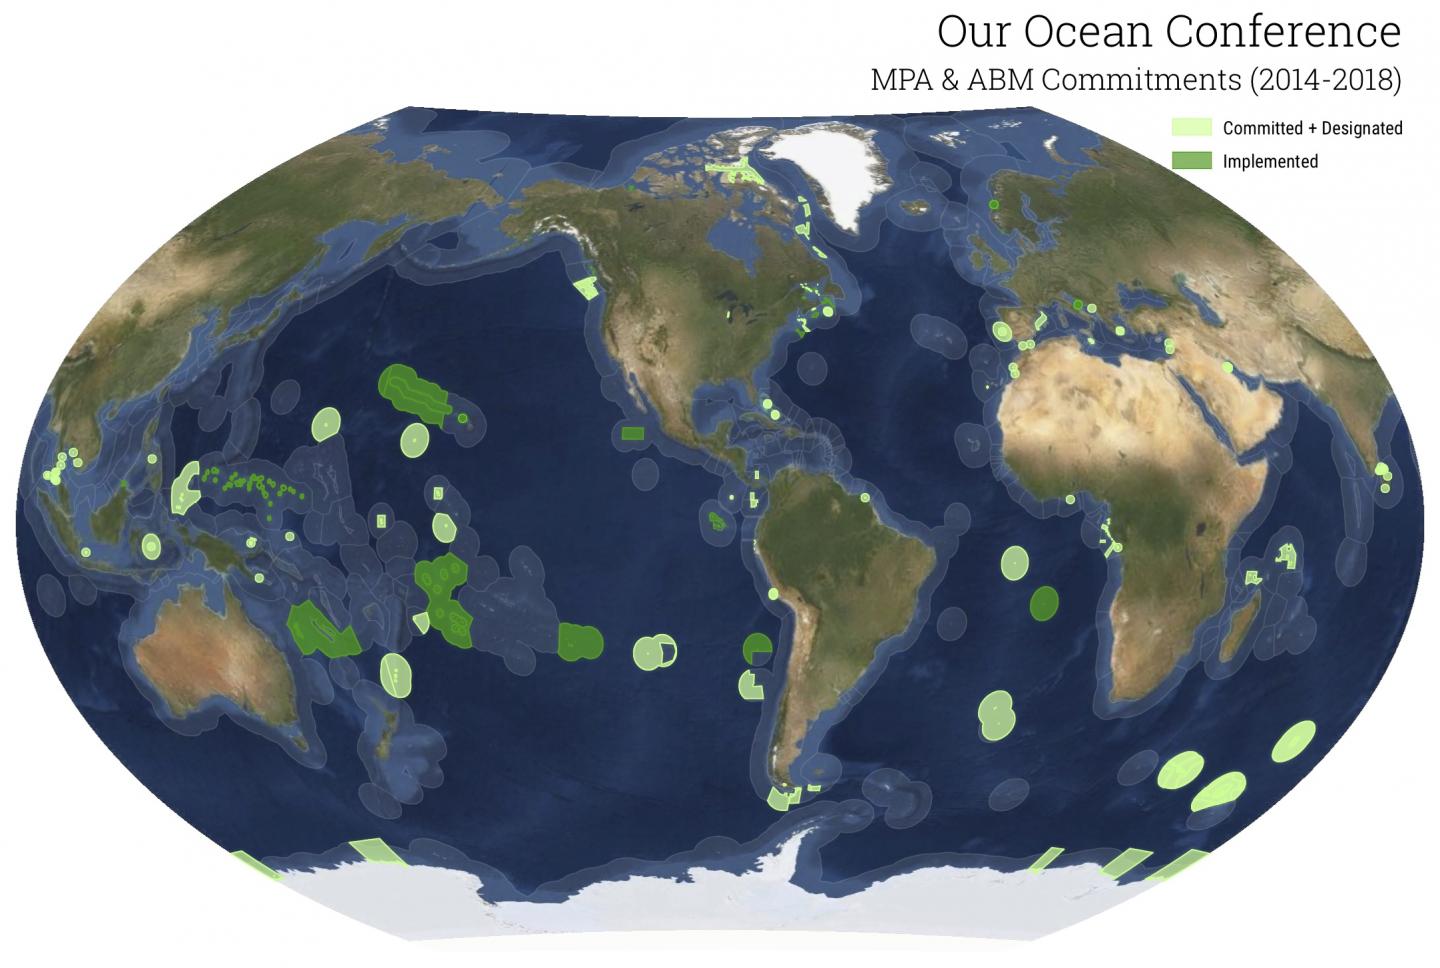 Protected Areas in the Ocean